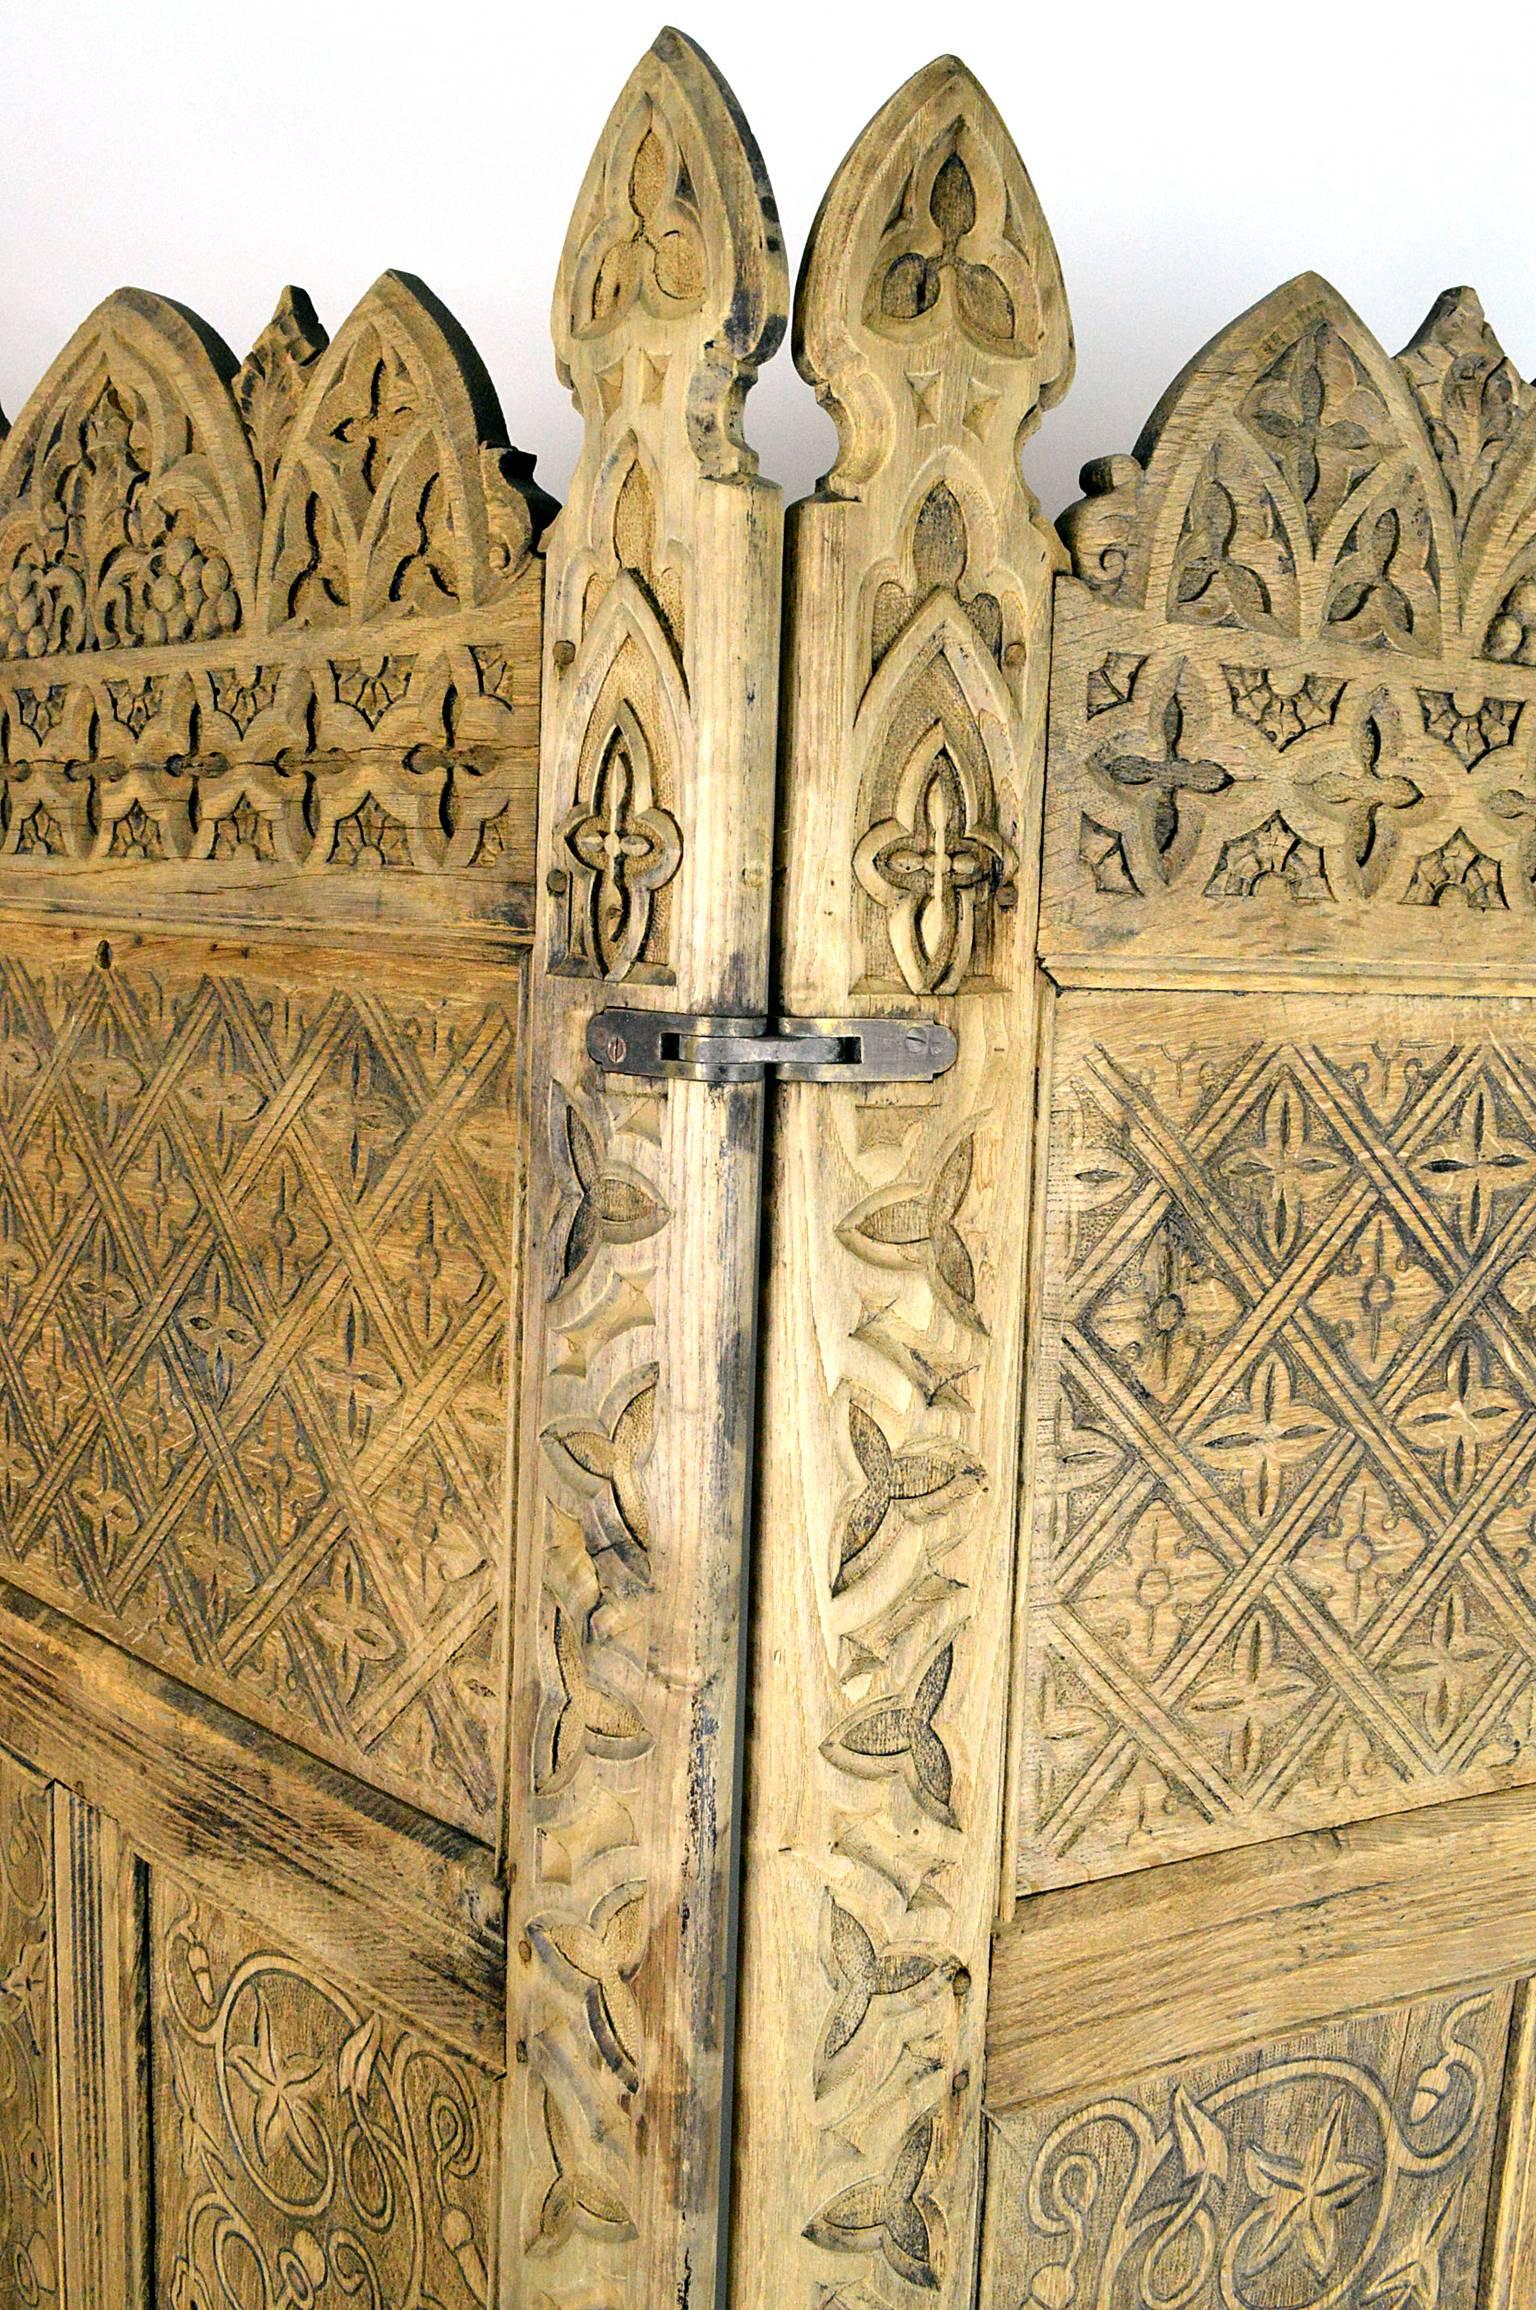 Three-panel English oak Gothic Revival screen having carving throughout with a bleached wood finish.